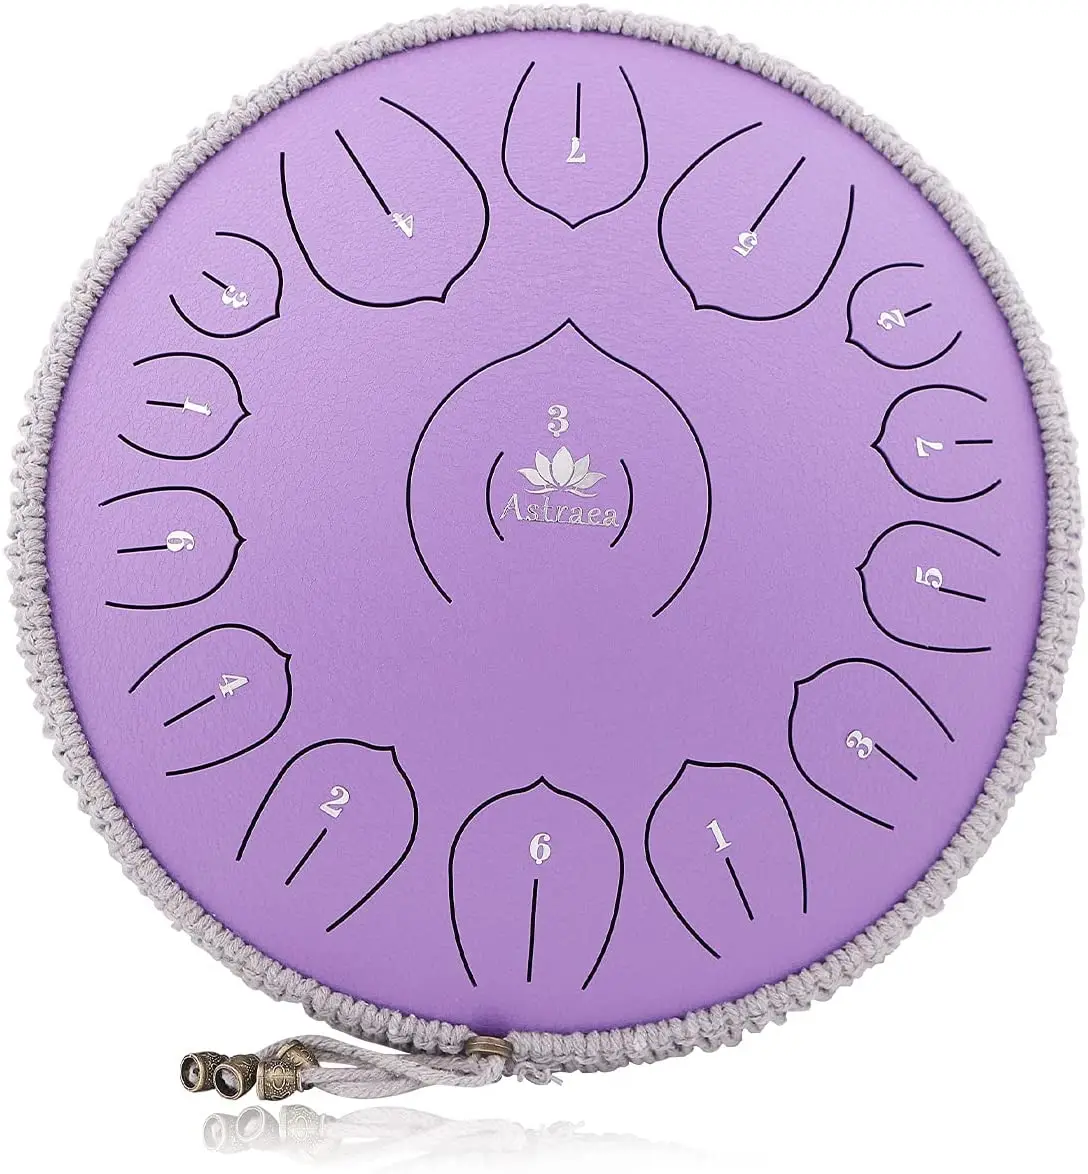 steel tongue drum 15 notes 14